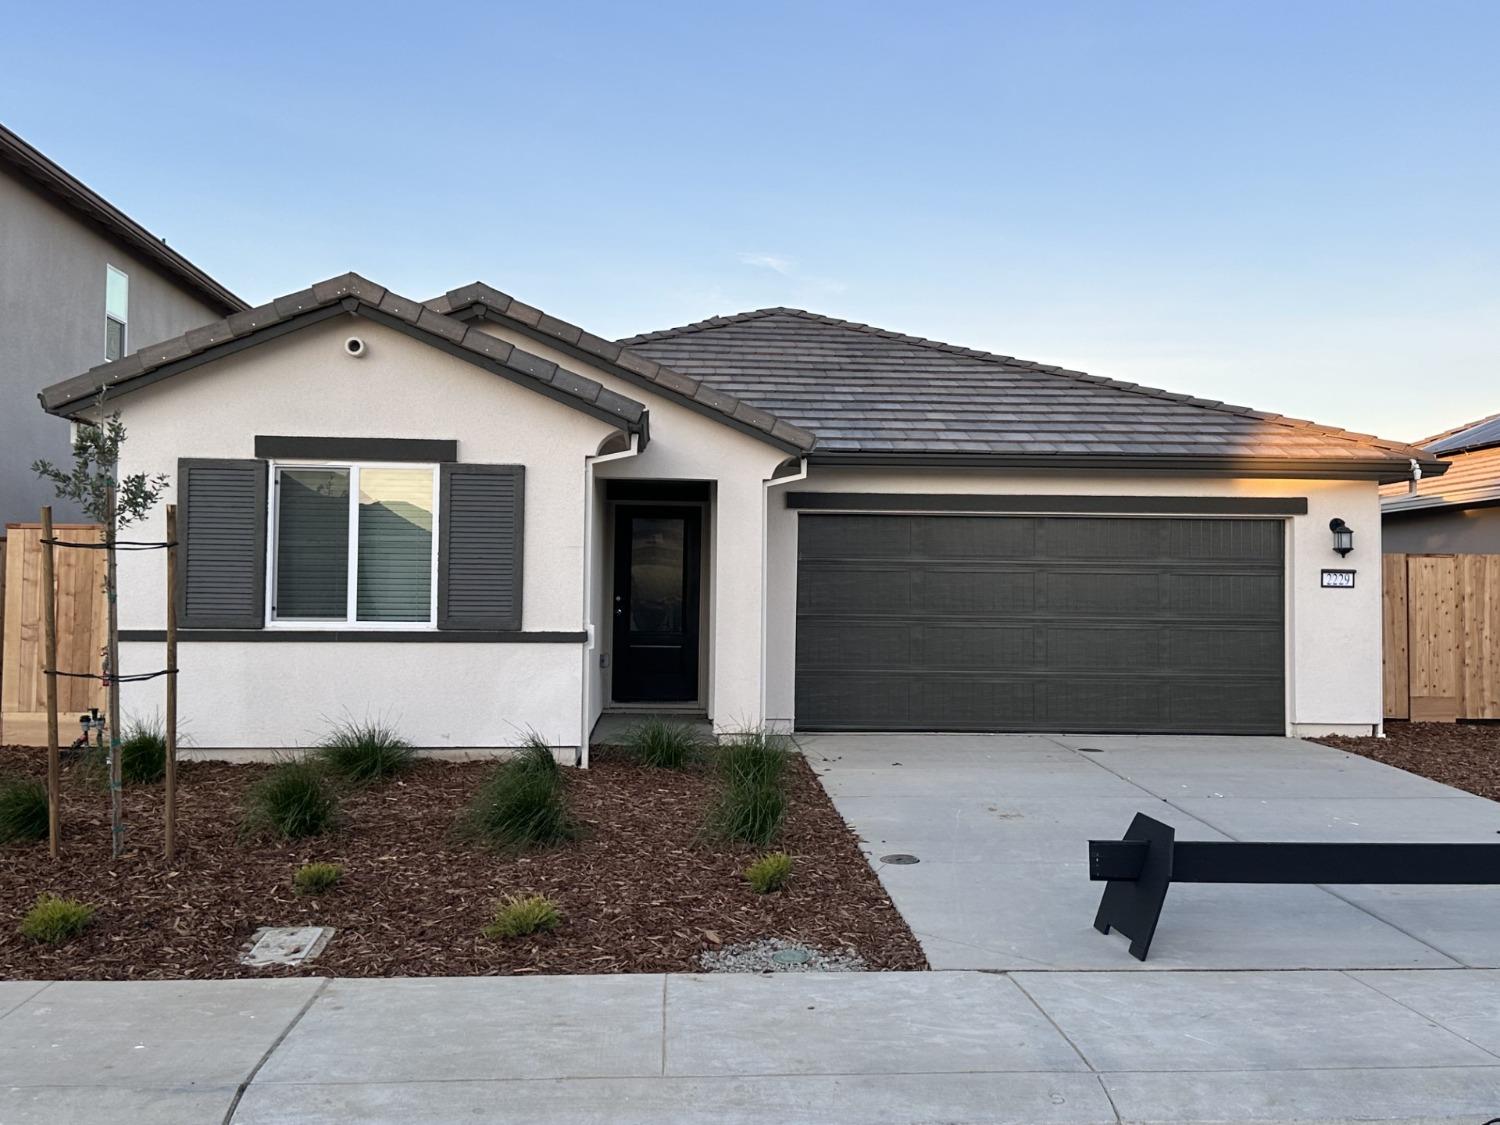 Photo of 2241 Sunshine Dr in Newman, CA